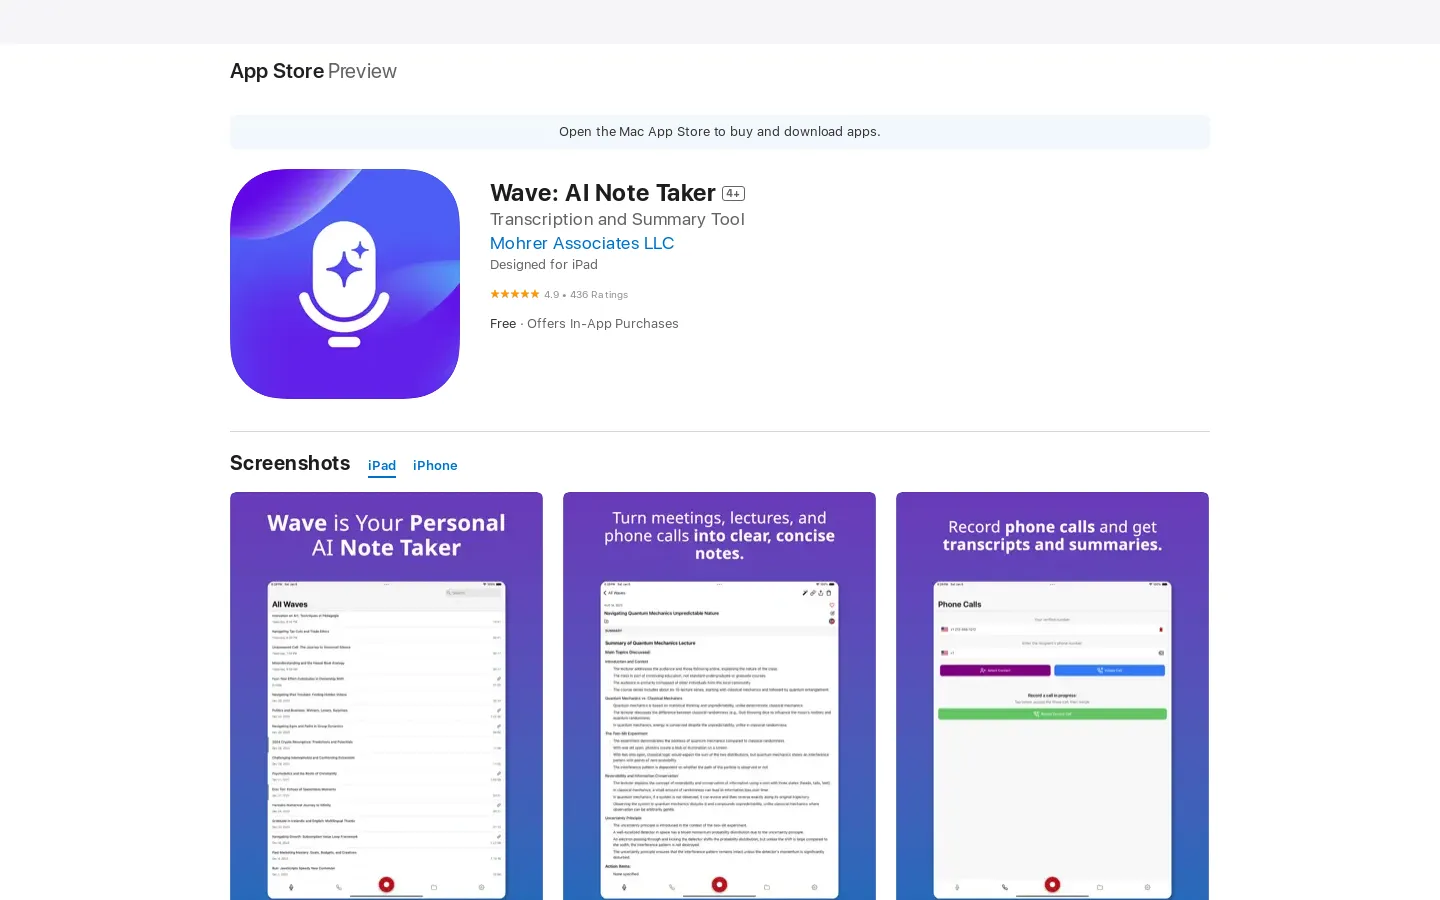 Wave: AI Note Taker on the App Store